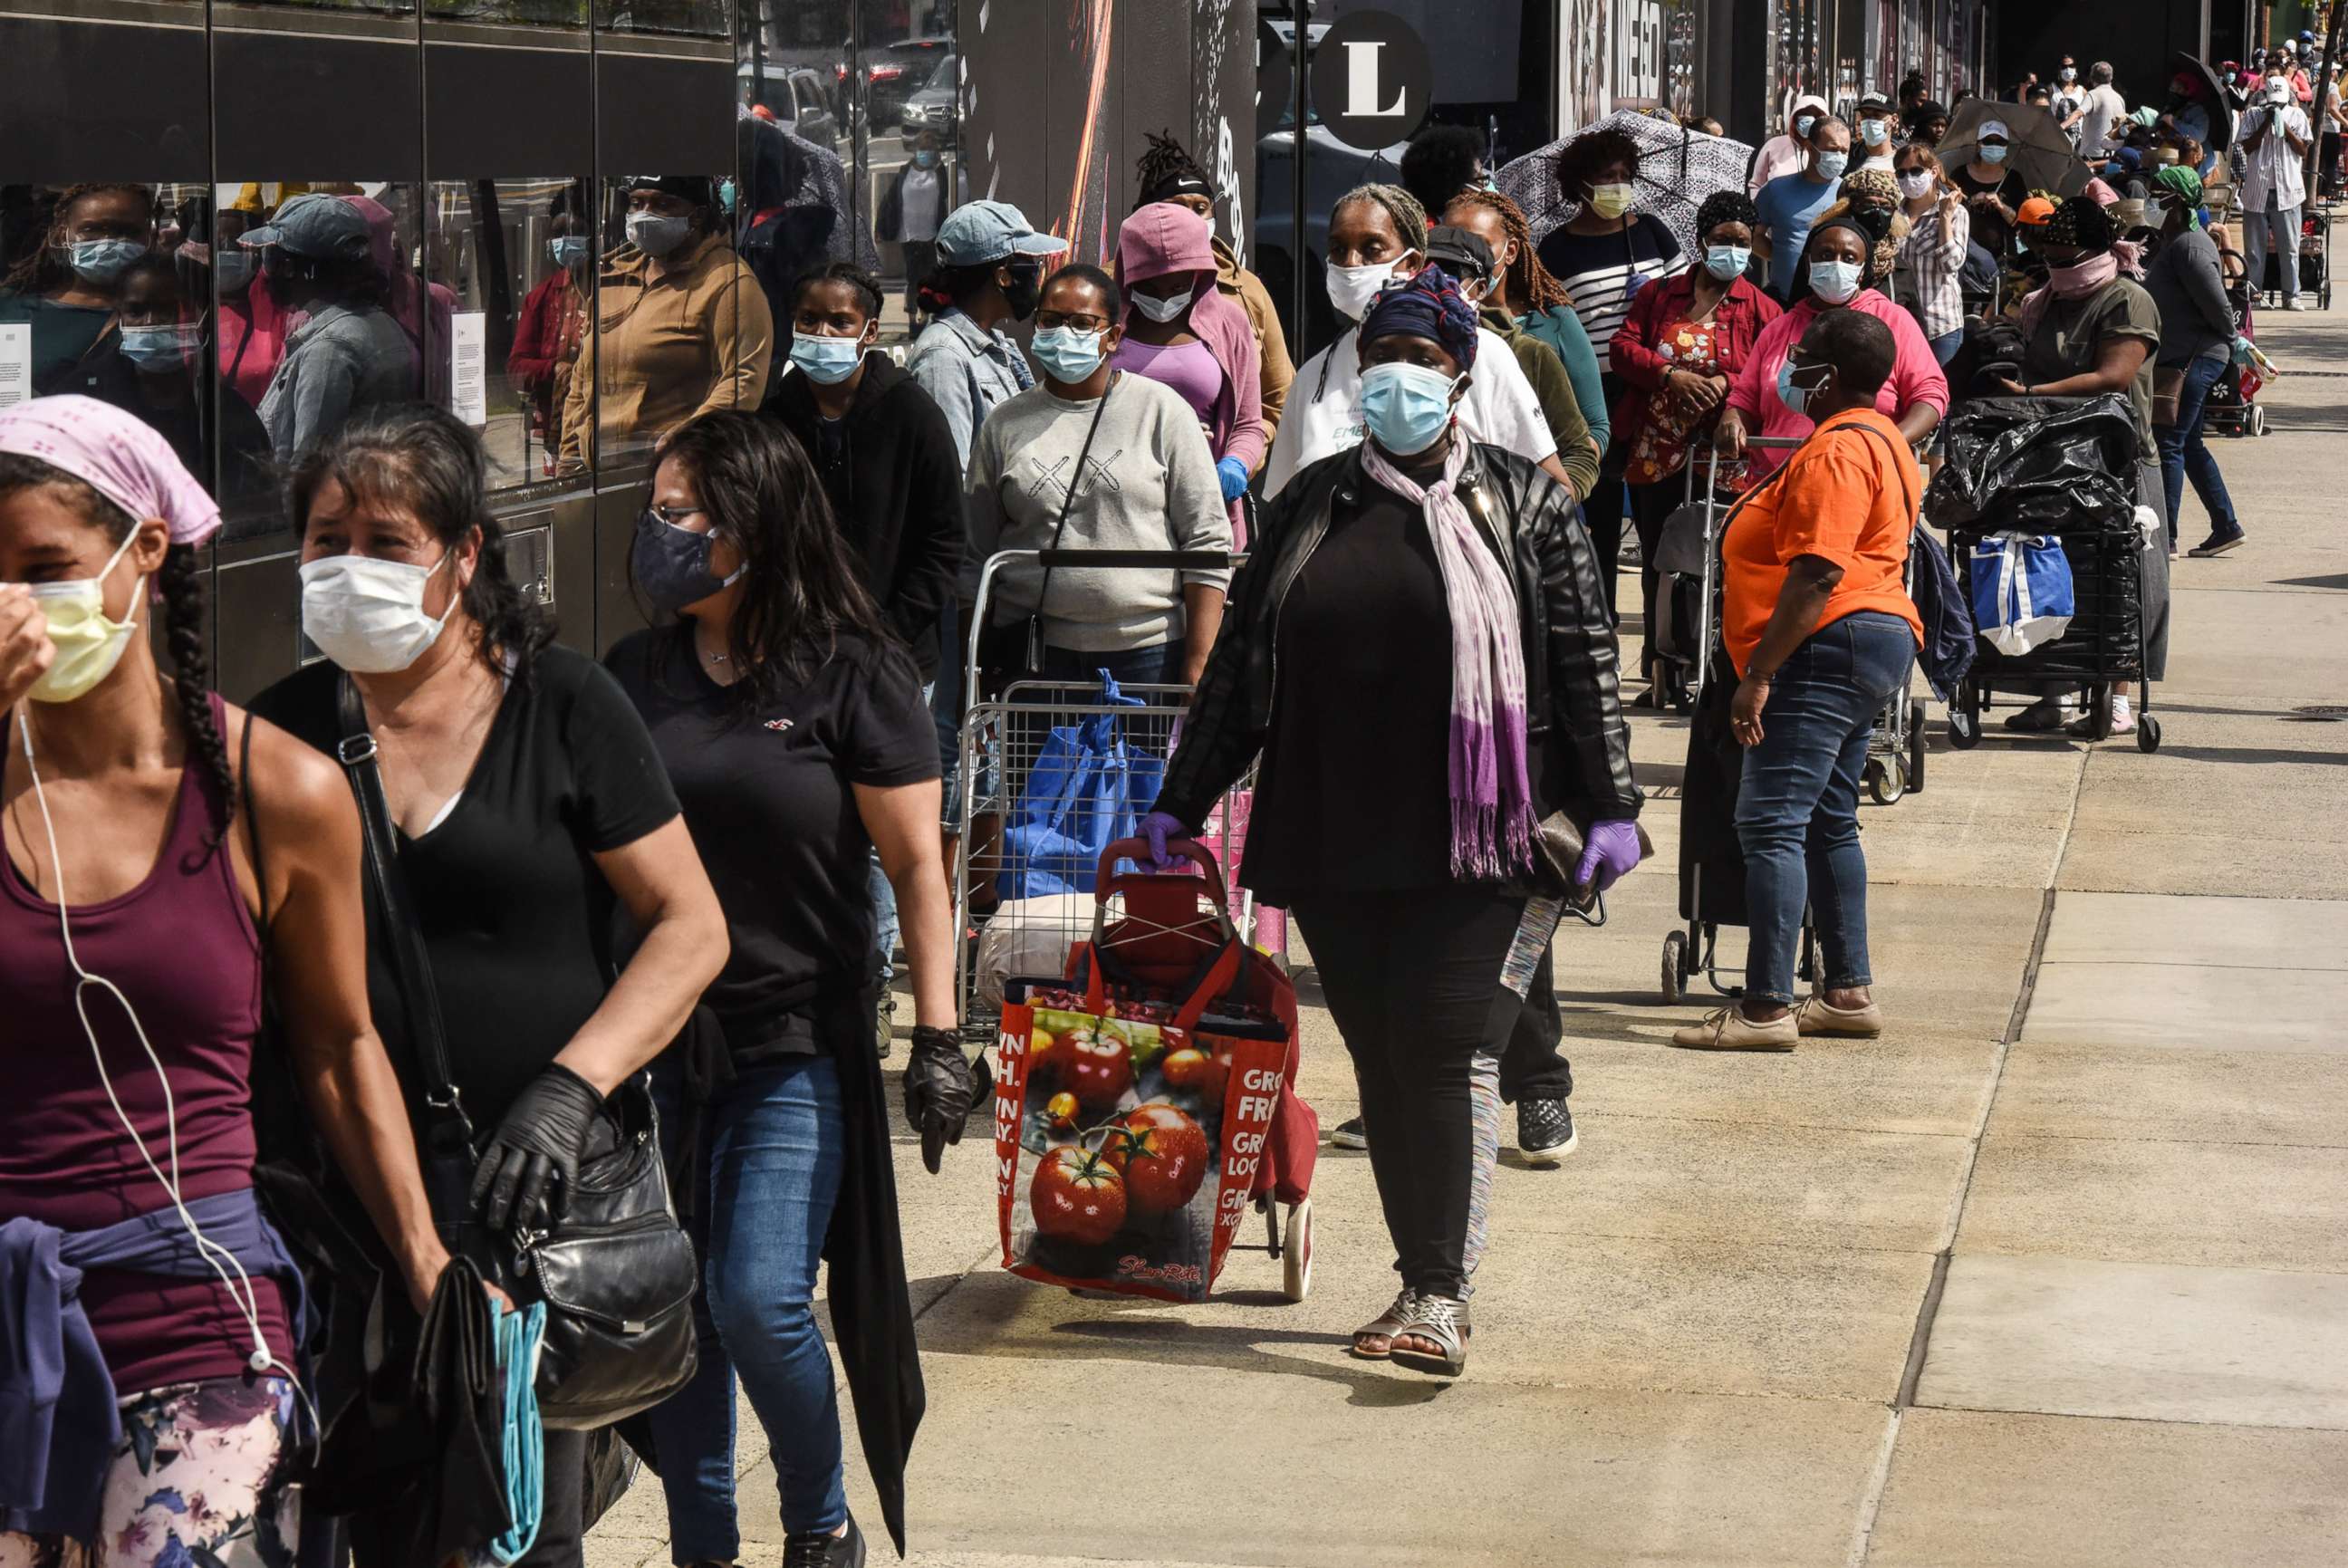 PHOTO: People wait on a long line to receive a food bank donation in the Brooklyn borough in New York, May 15, 2020.